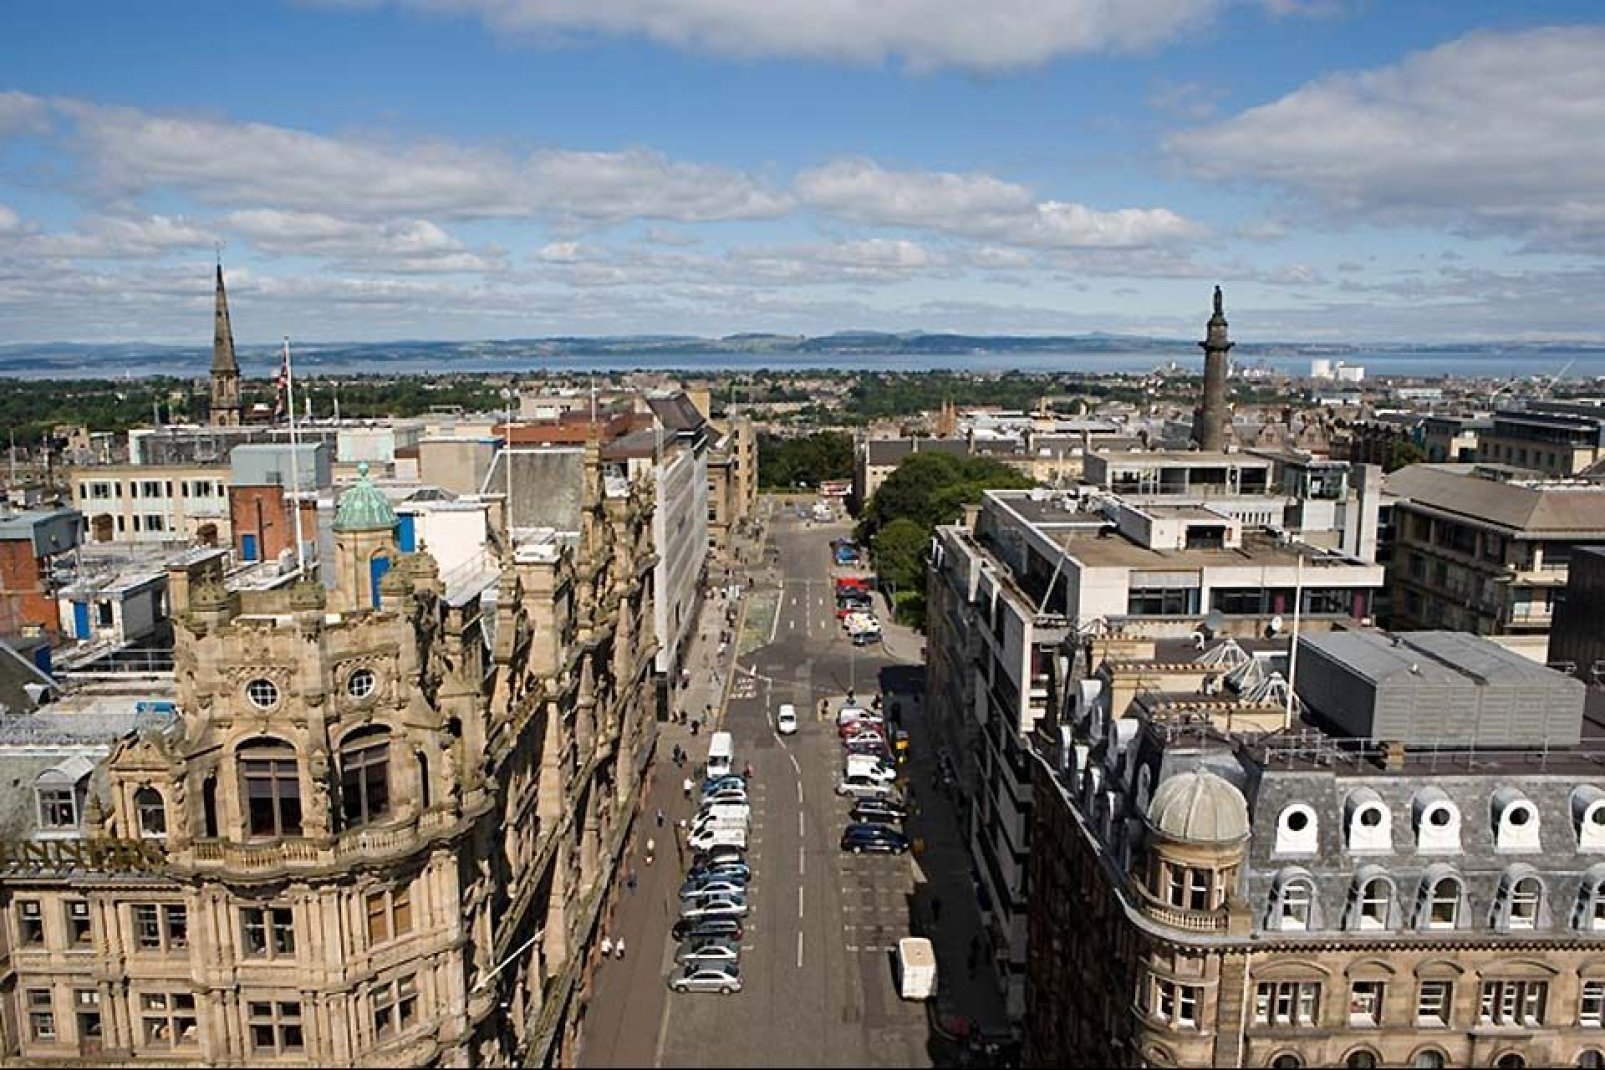 There are over 4,500 listed buildings within the city.